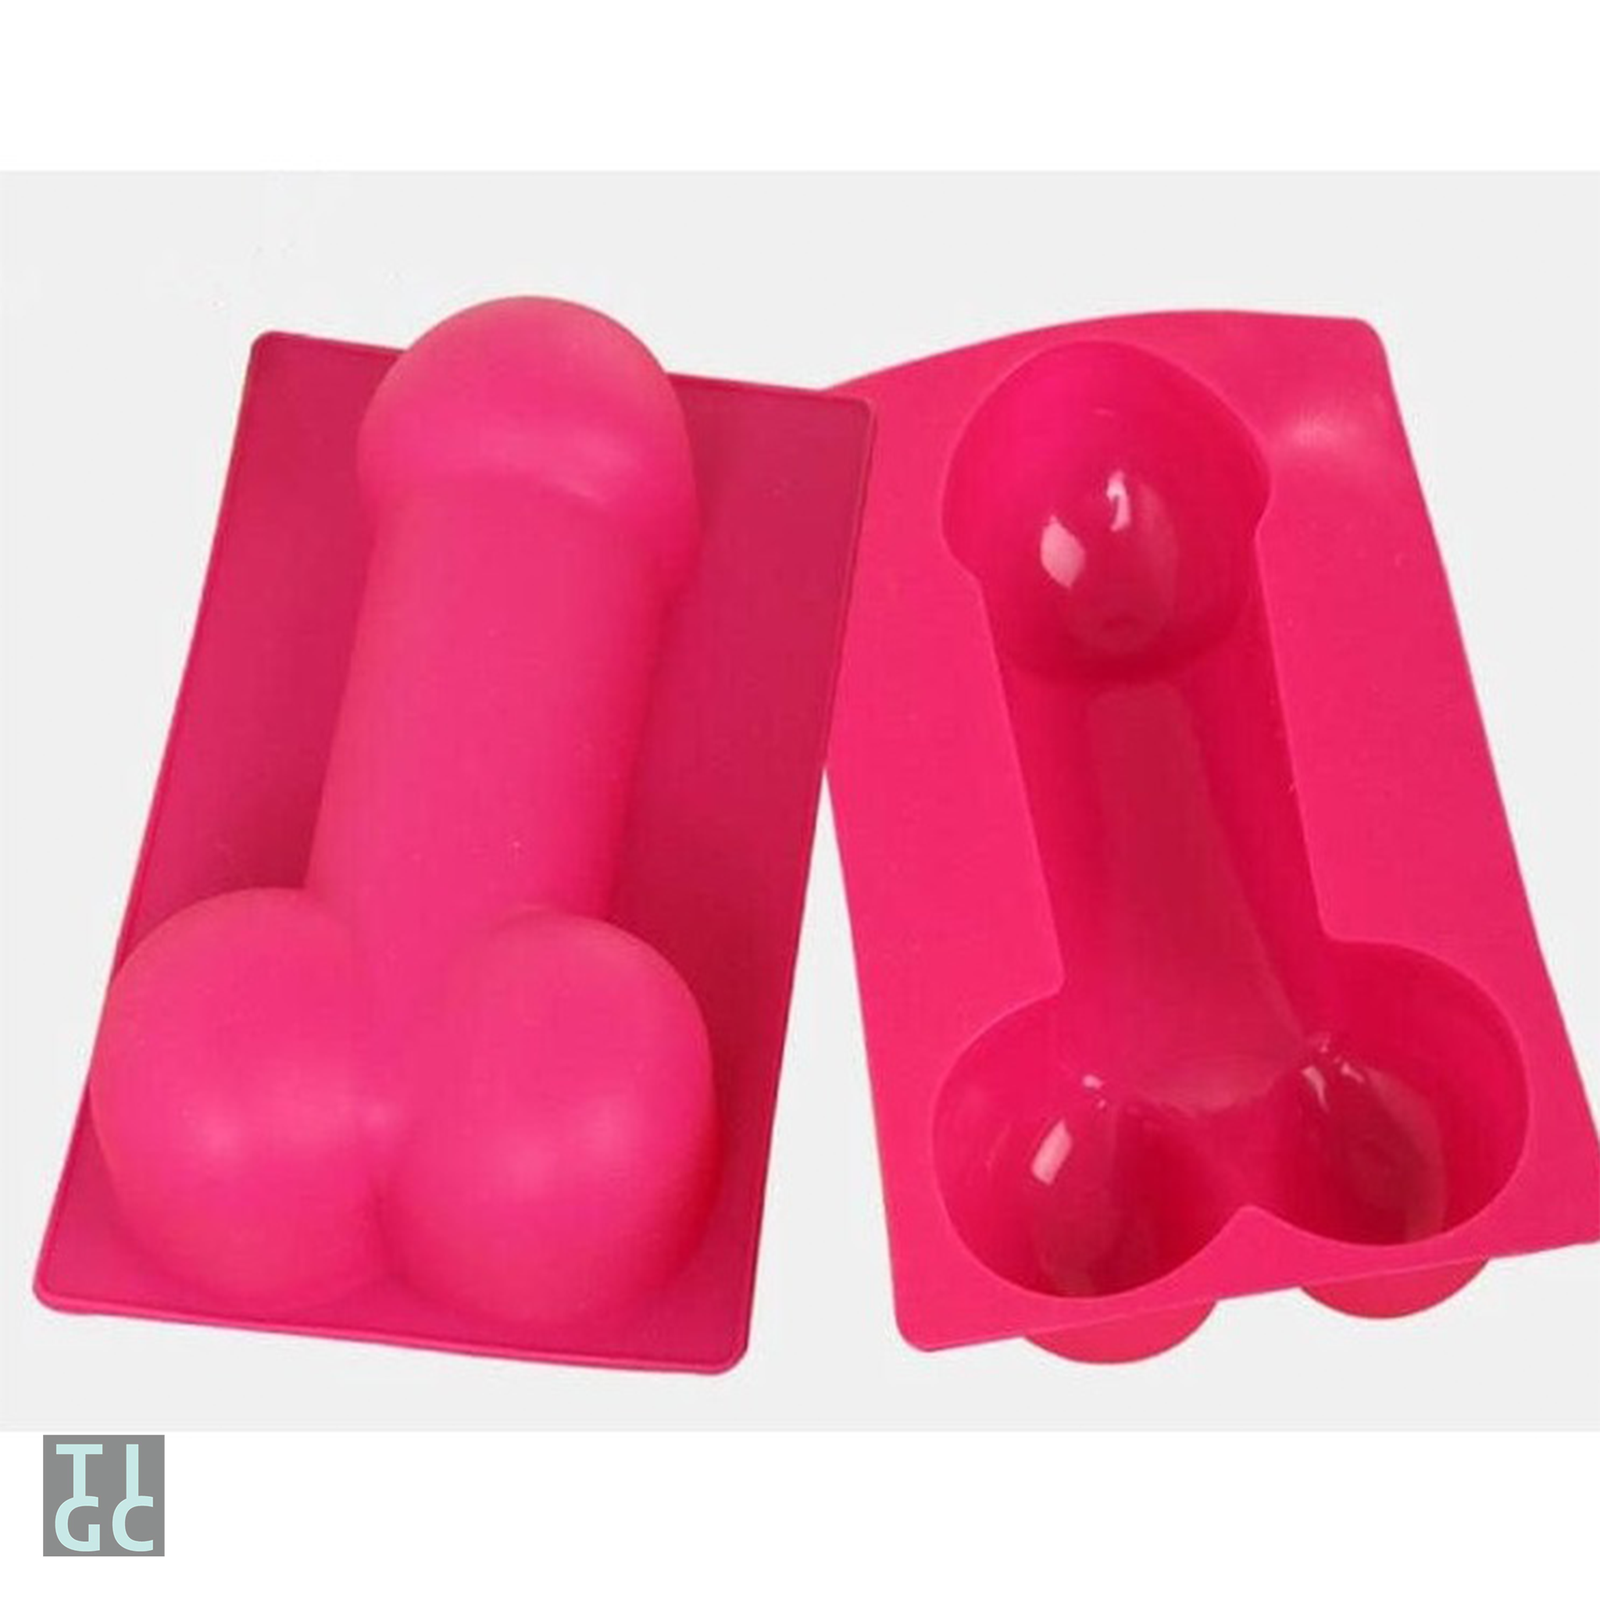 https://cdn.shopify.com/s/files/1/2423/8037/products/tigc-the-inappropriate-gift-co-inappropriate-cake-penis-mold-29922757640234_1600x.png?v=1666506468